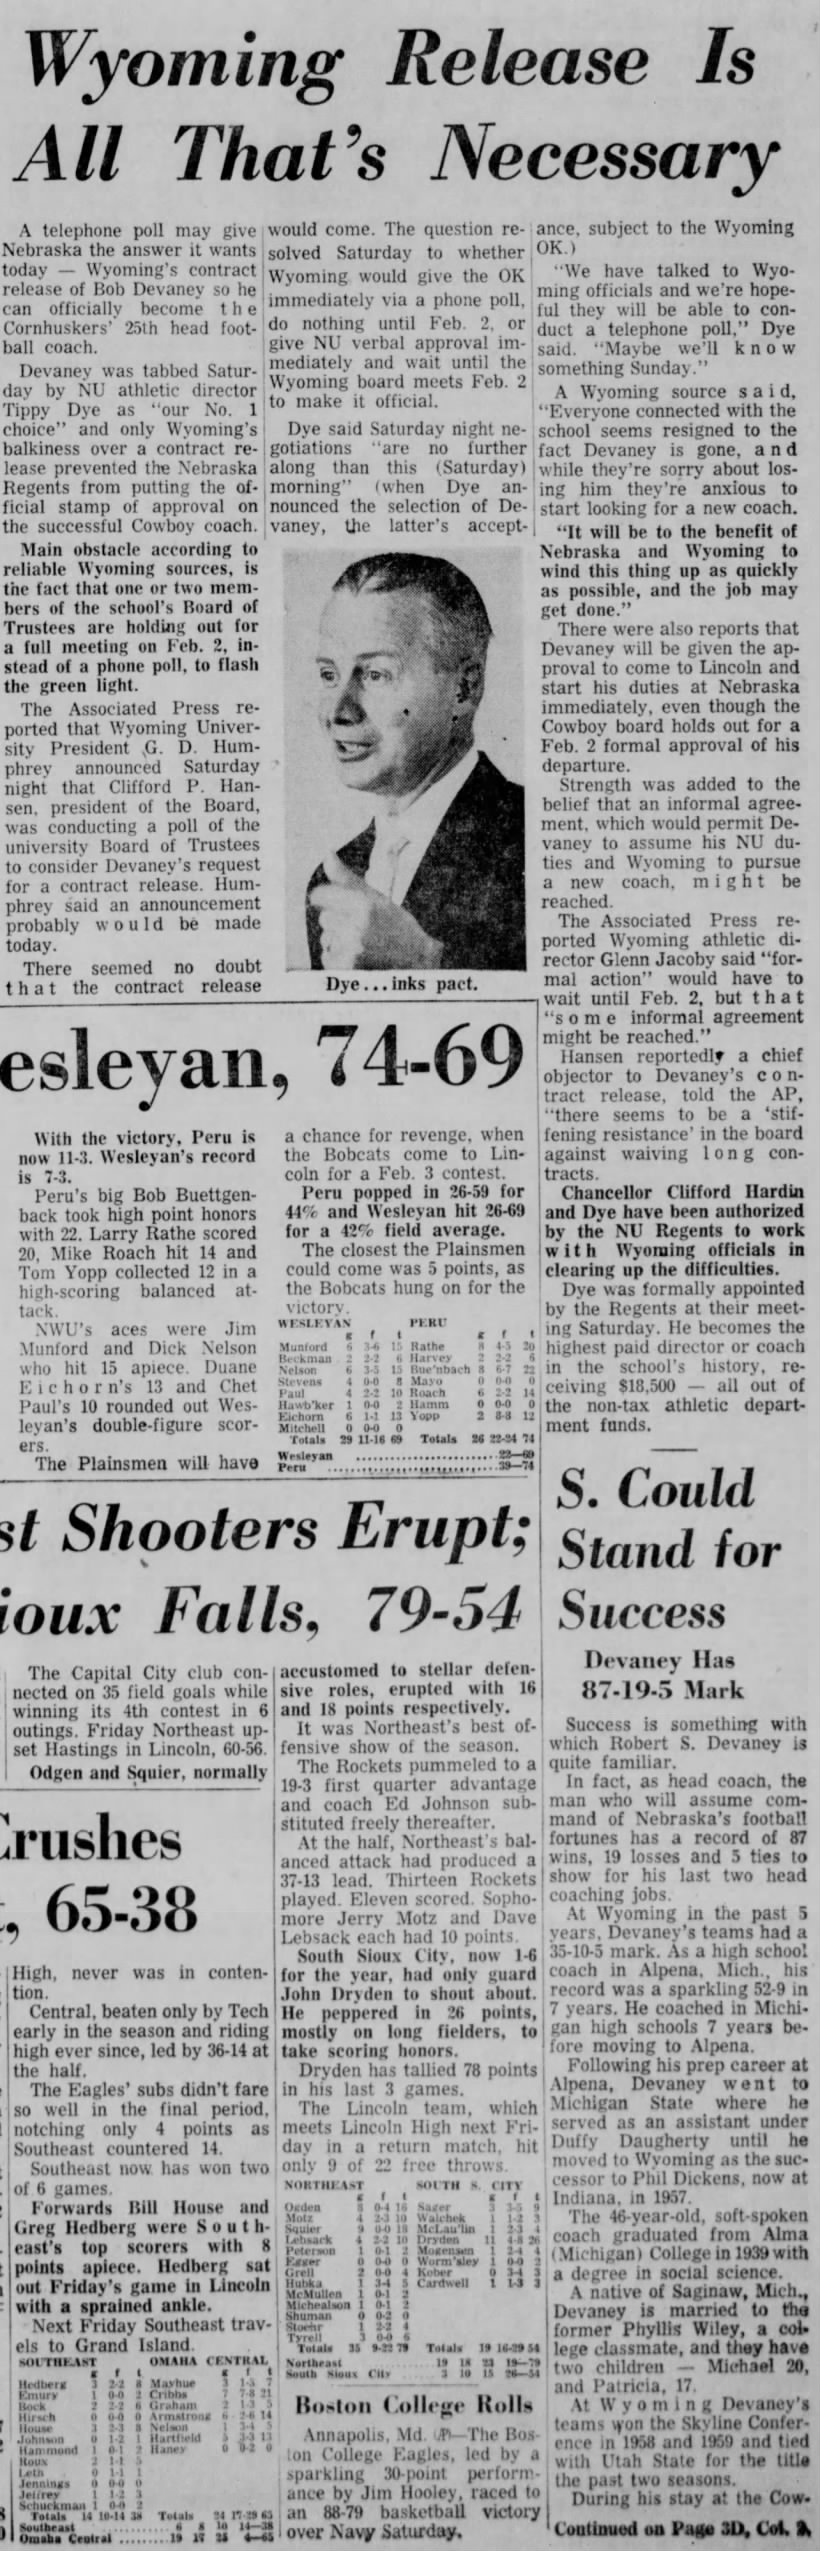 1962 Devaney hired, Wyoming release needed, LJS